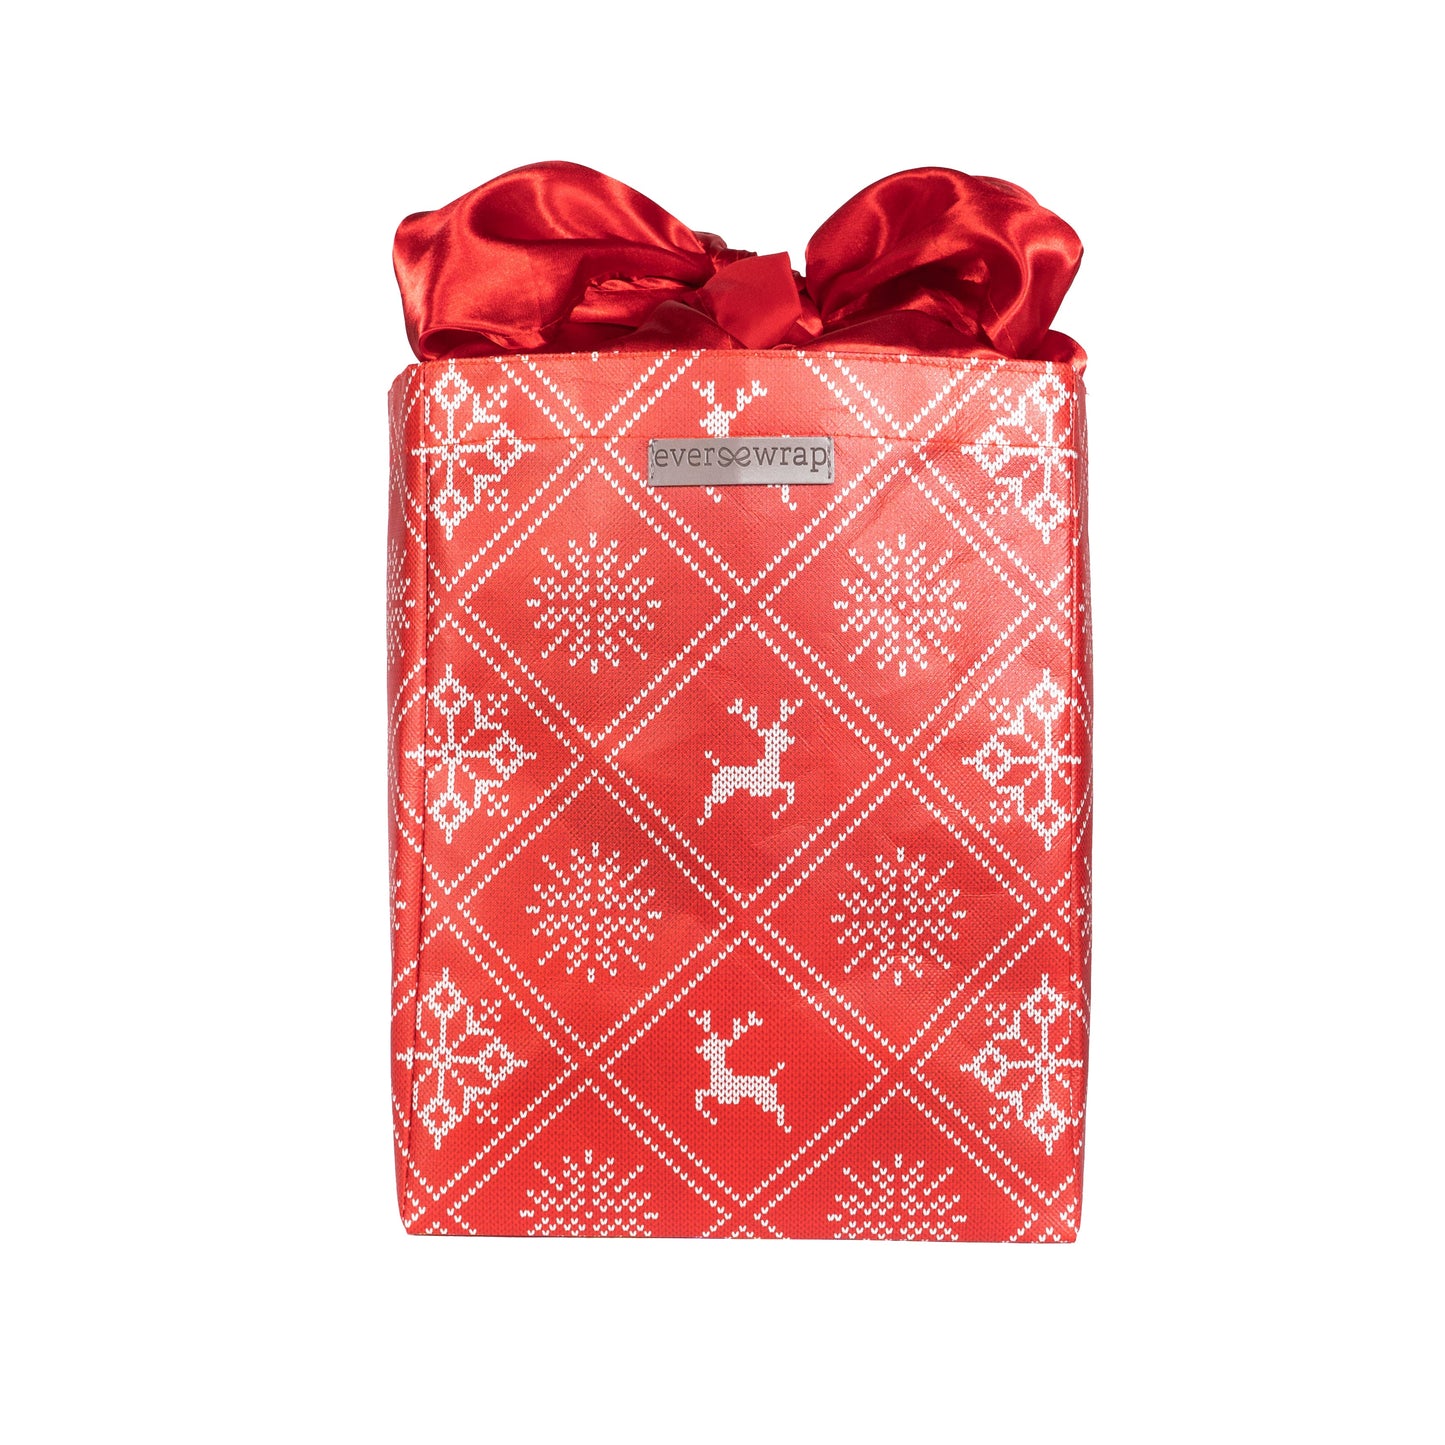 Holiday Red with Wintry Knitted Sweater Design fold, store, and reseal with our reusable gift bag, satin closure makes for an eco-friendly gift bag - EverWrap